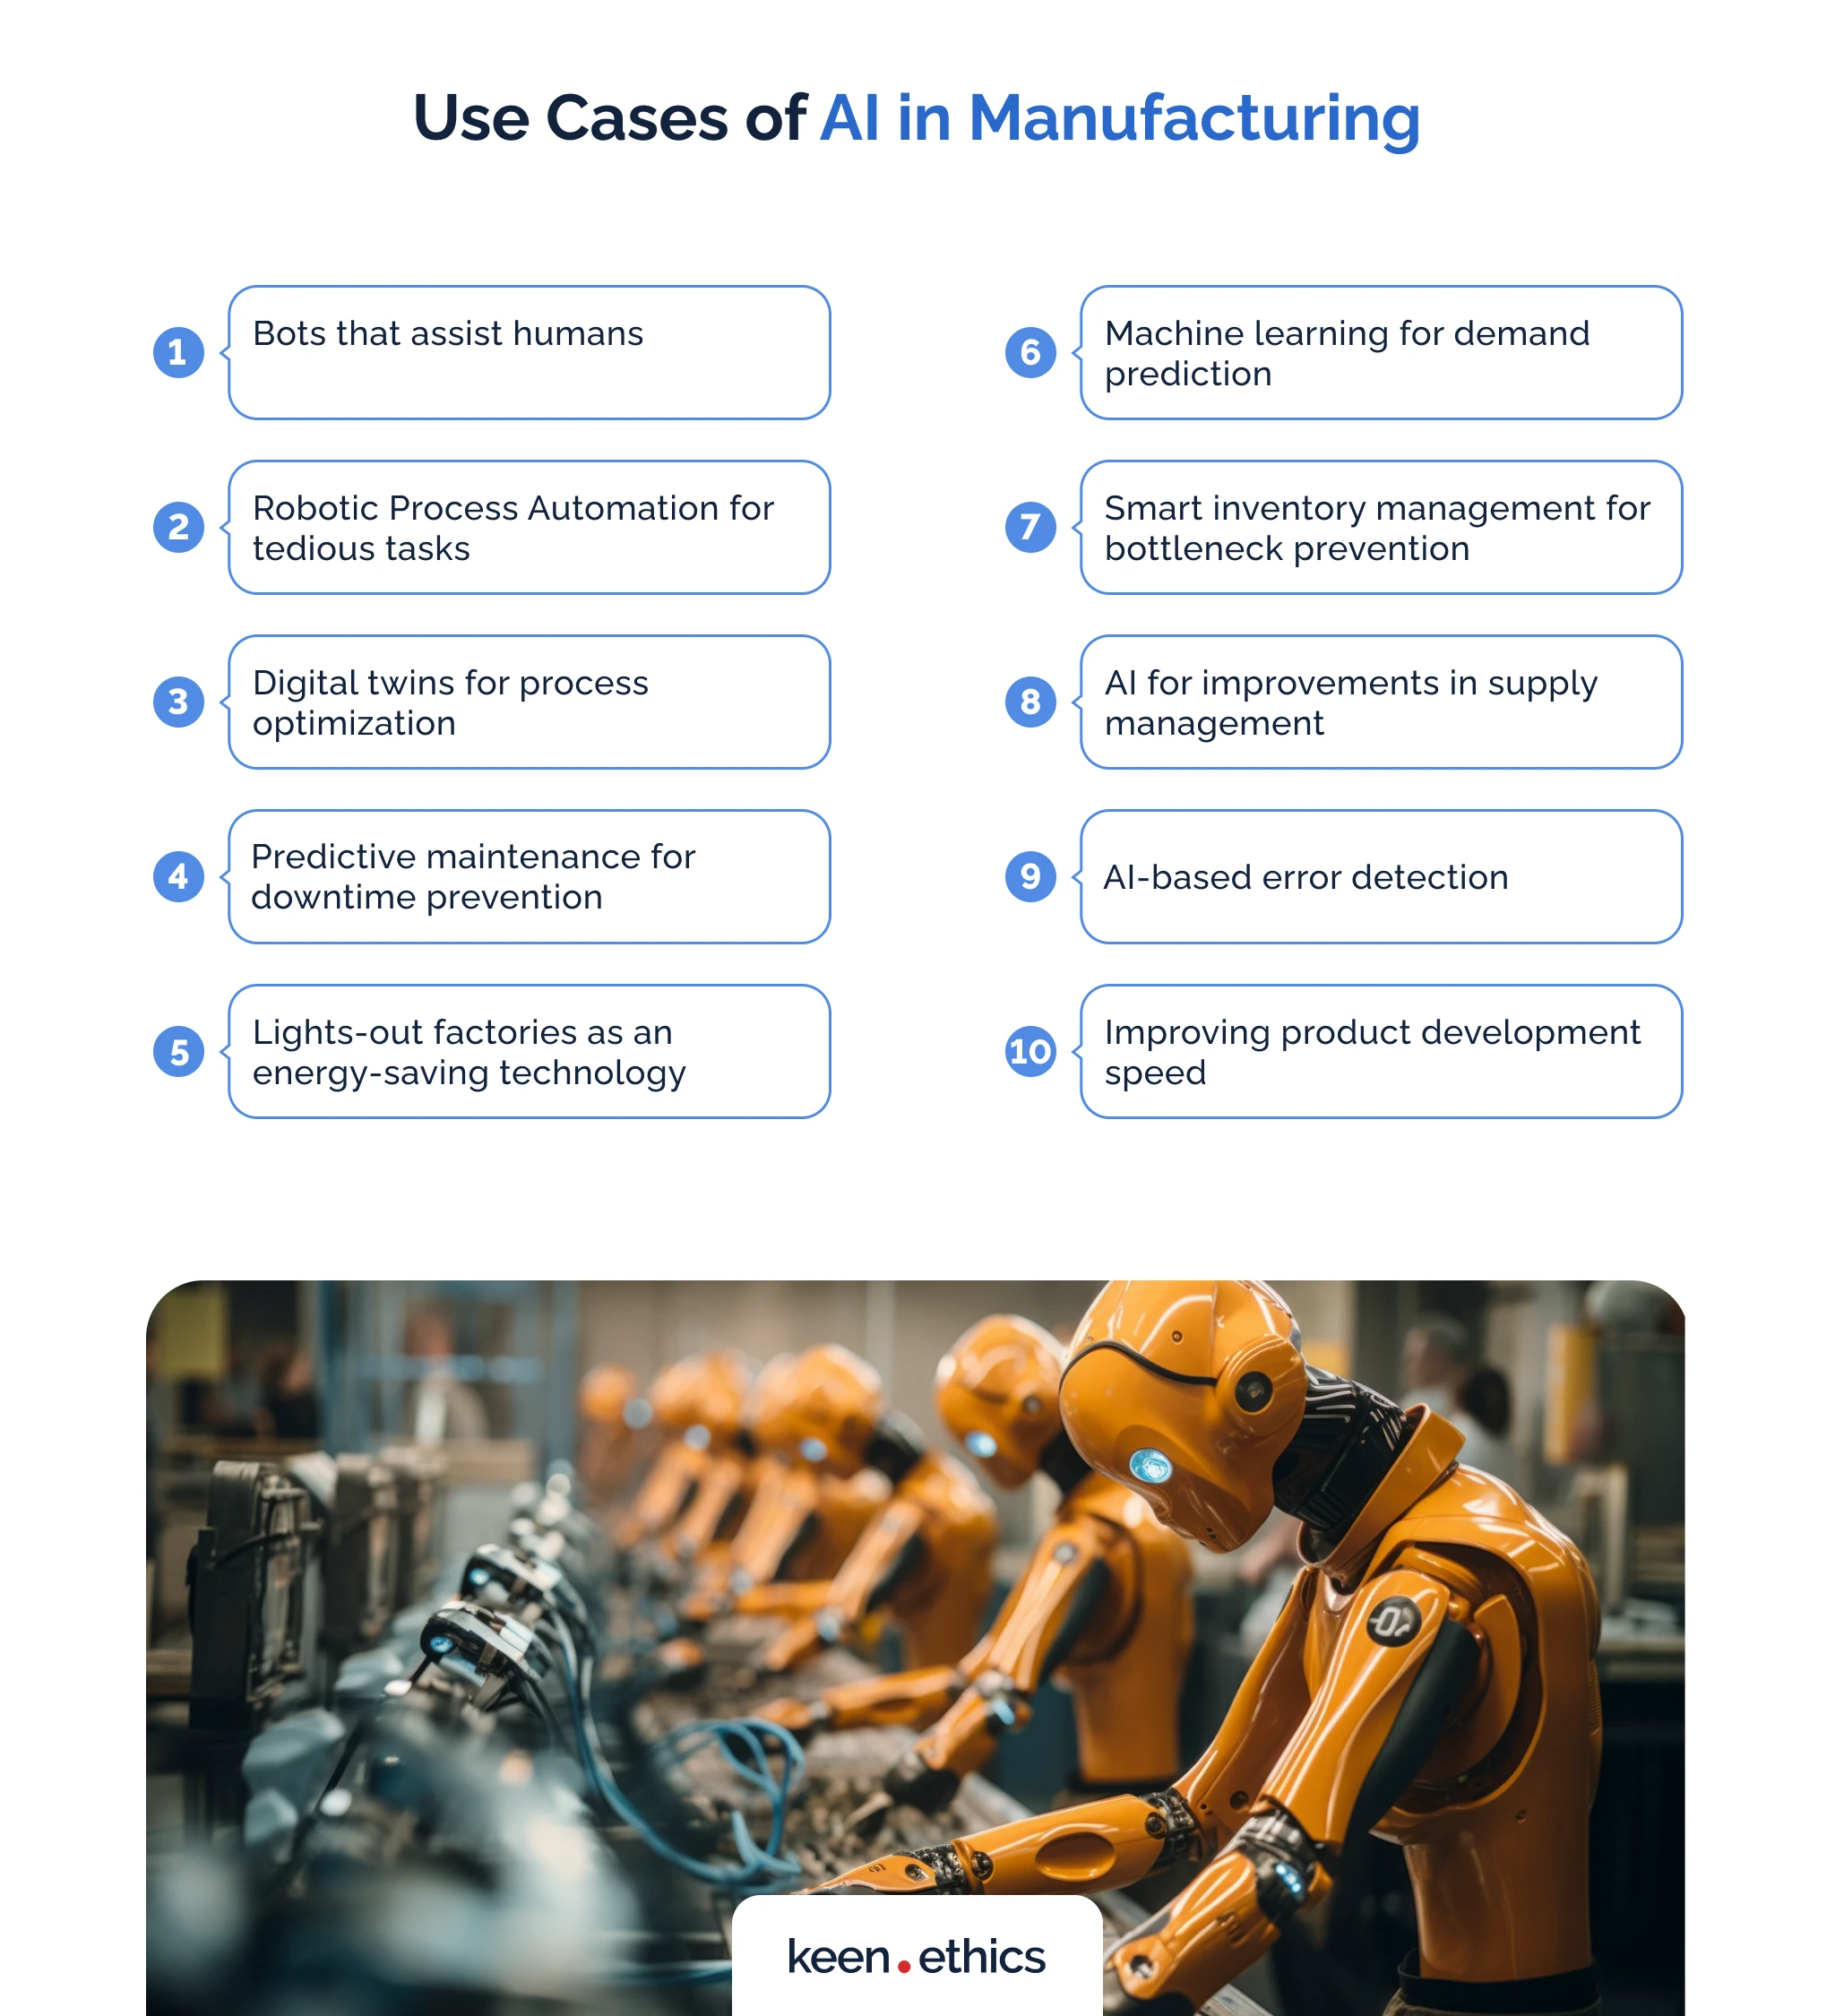 Uses cases of AI in manufacturing